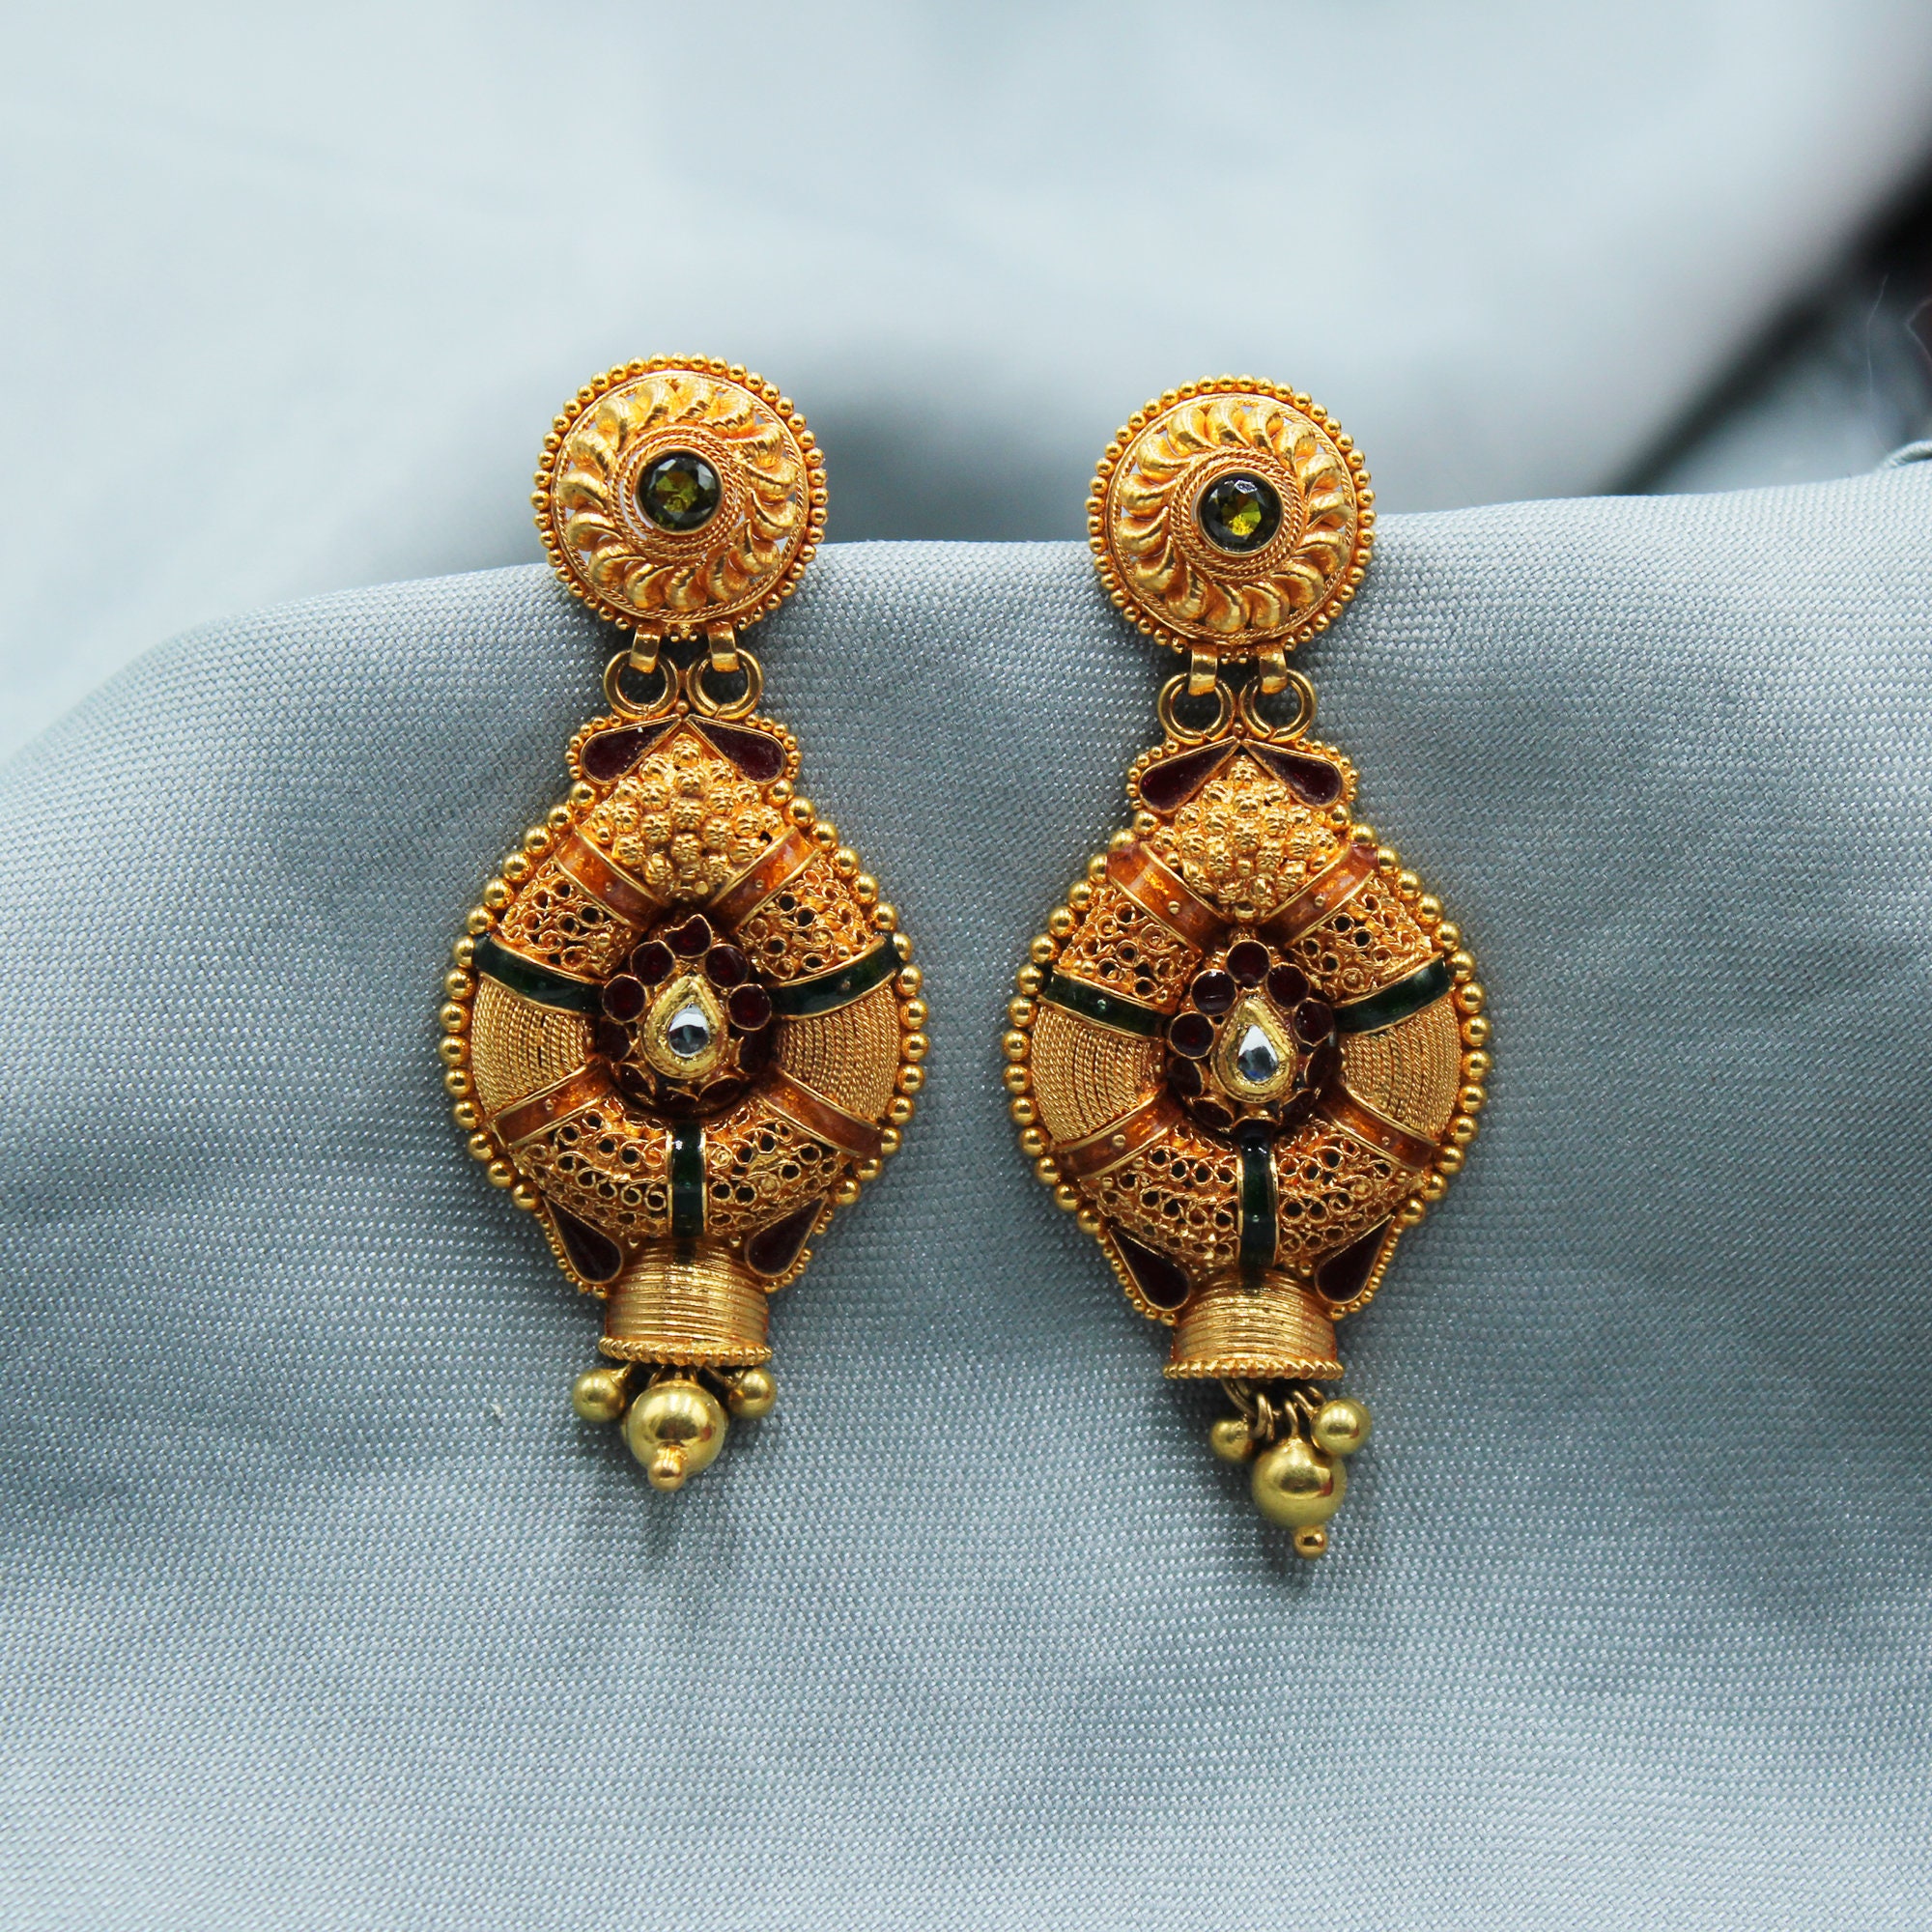 Flipkart.com - Buy FashionCraft Bollyood inspired gold Plated Designer  Earring Jhumki Alloy Stud Earring Online at Best Prices in India